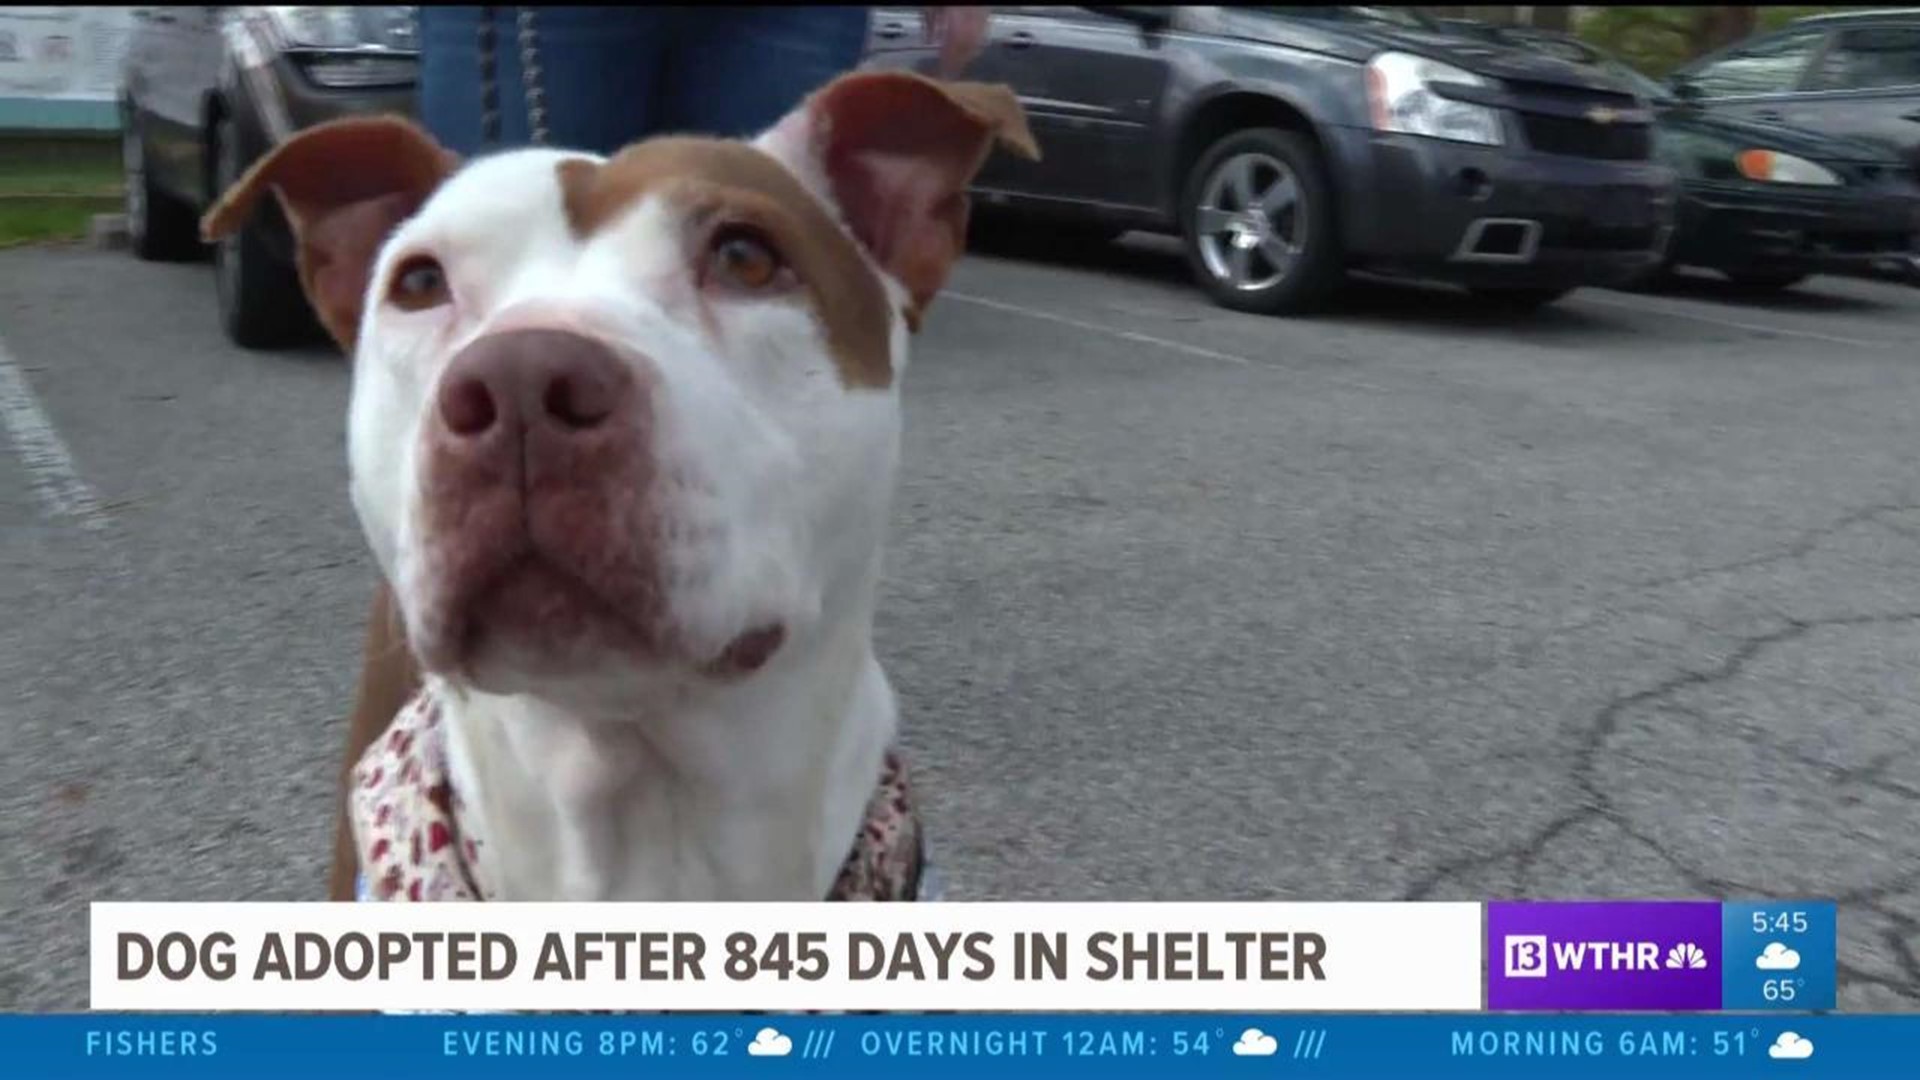 Dog adopted after long shelter stay